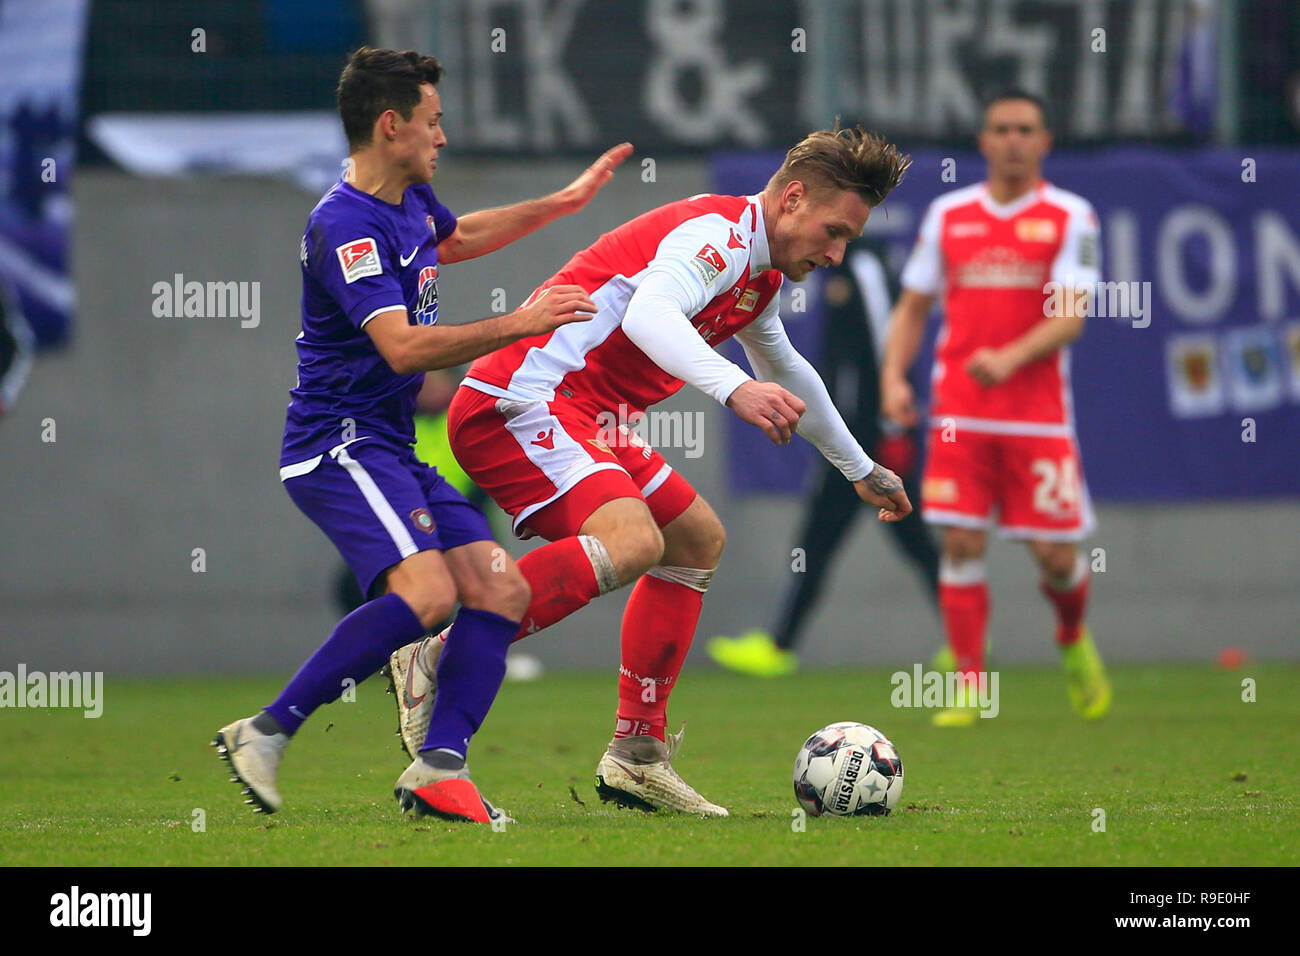 Aue, Germany. 23rd Dec, 2018. Soccer: 2nd Bundesliga, 18th matchday, FC Erzgebirge Aue - 1st FC Union Berlin in the Erzgebirgsstadion Aue Clemens Fandrich and Marvin Friedrich in the duel for the ball, behind them Manuel Schmiedebach Credit: Daniel Schäfer/dpa - IMPORTANT NOTE: In accordance with the requirements of the DFL Deutsche Fußball Liga or the DFB Deutscher Fußball-Bund, it is prohibited to use or have used photographs taken in the stadium and/or the match in the form of sequence images and/or video-like photo sequences./dpa/Alamy Live News Stock Photo